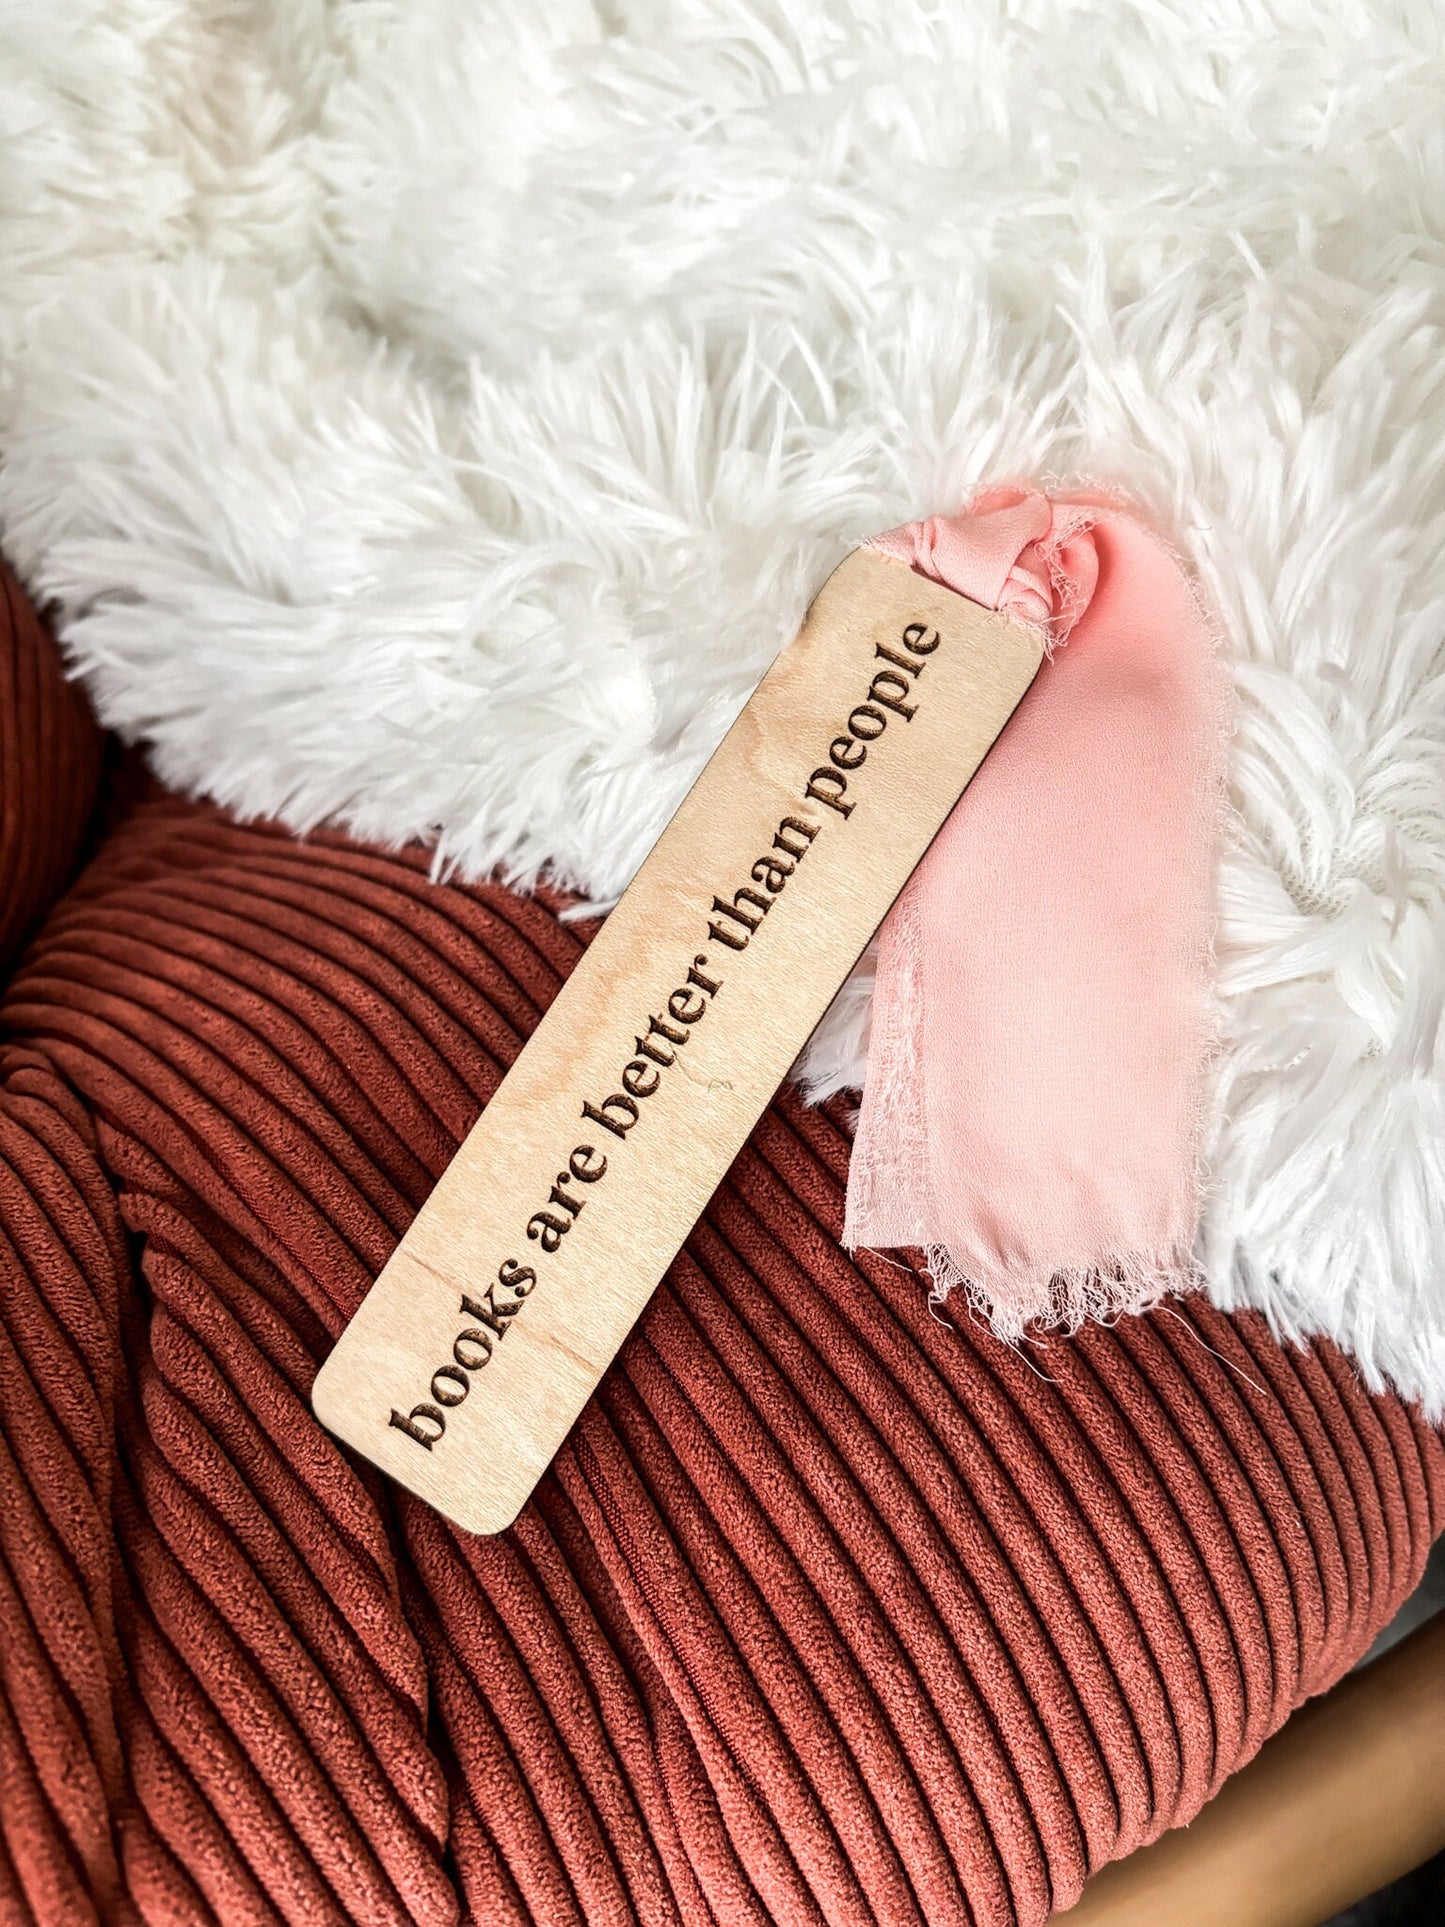 Books Are Better Than People Wood Bookmark, Acrylic Bookmark, Funny Bookmark Gift, Laser Engraved Bookmark, Aesthetic Acrylic Bookmark